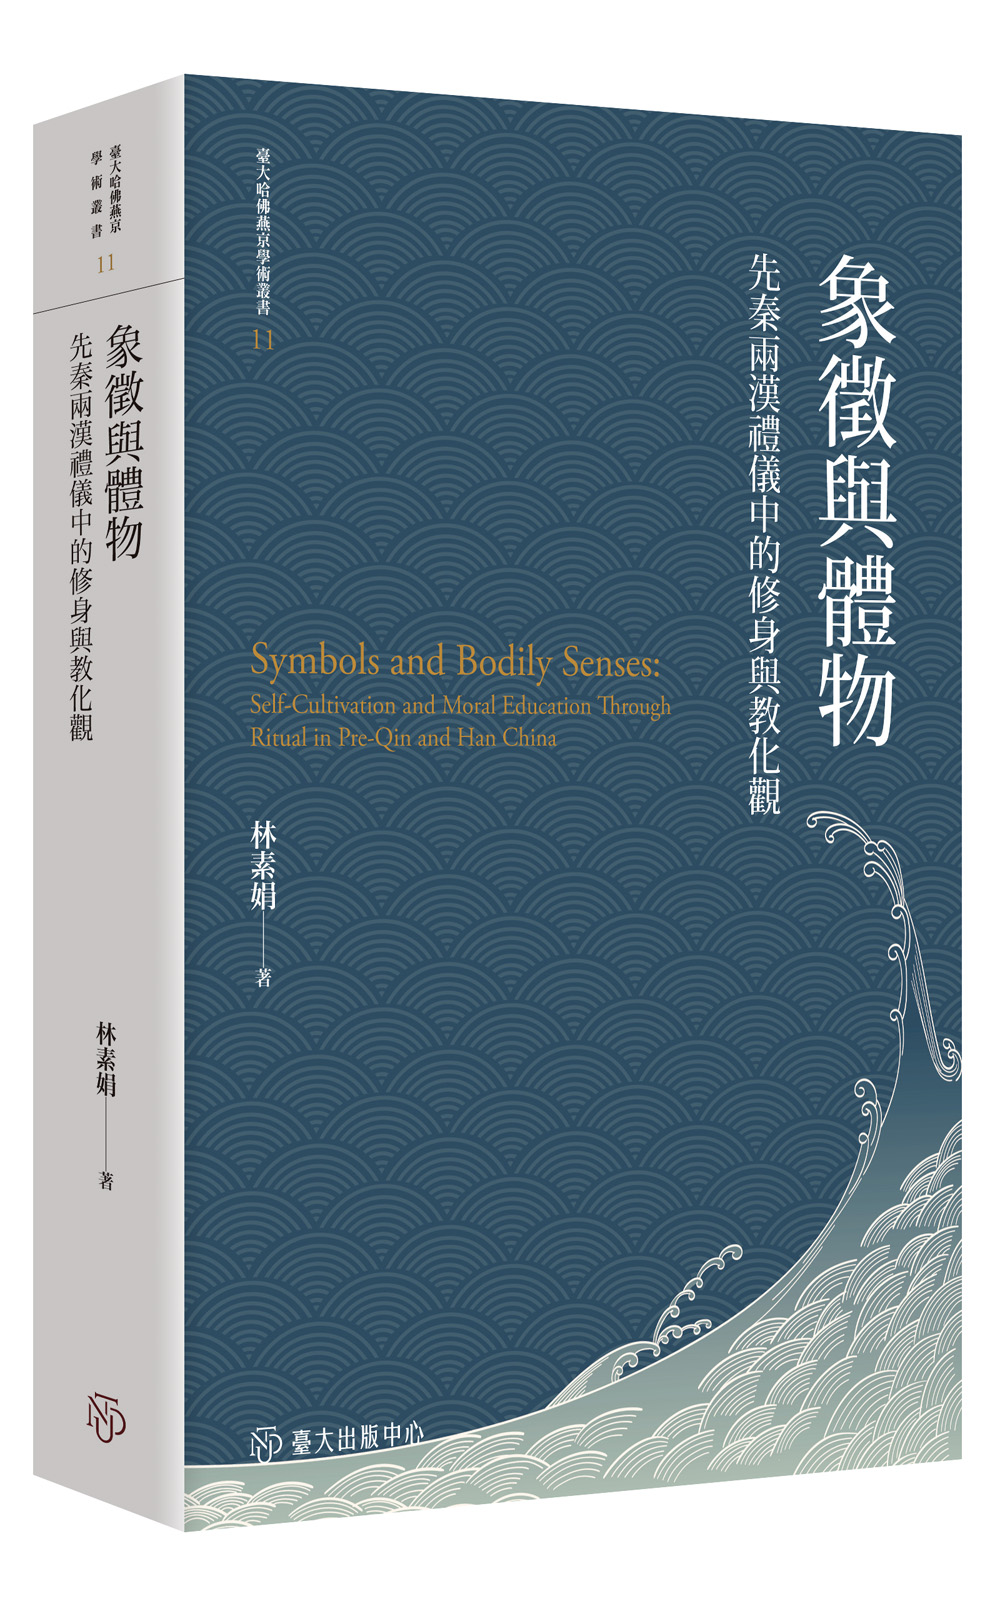 Symbols and Bodily Senses: Self-Cultivation and Moral Education Through Ritual in Pre-Qin and Han China (paperback)